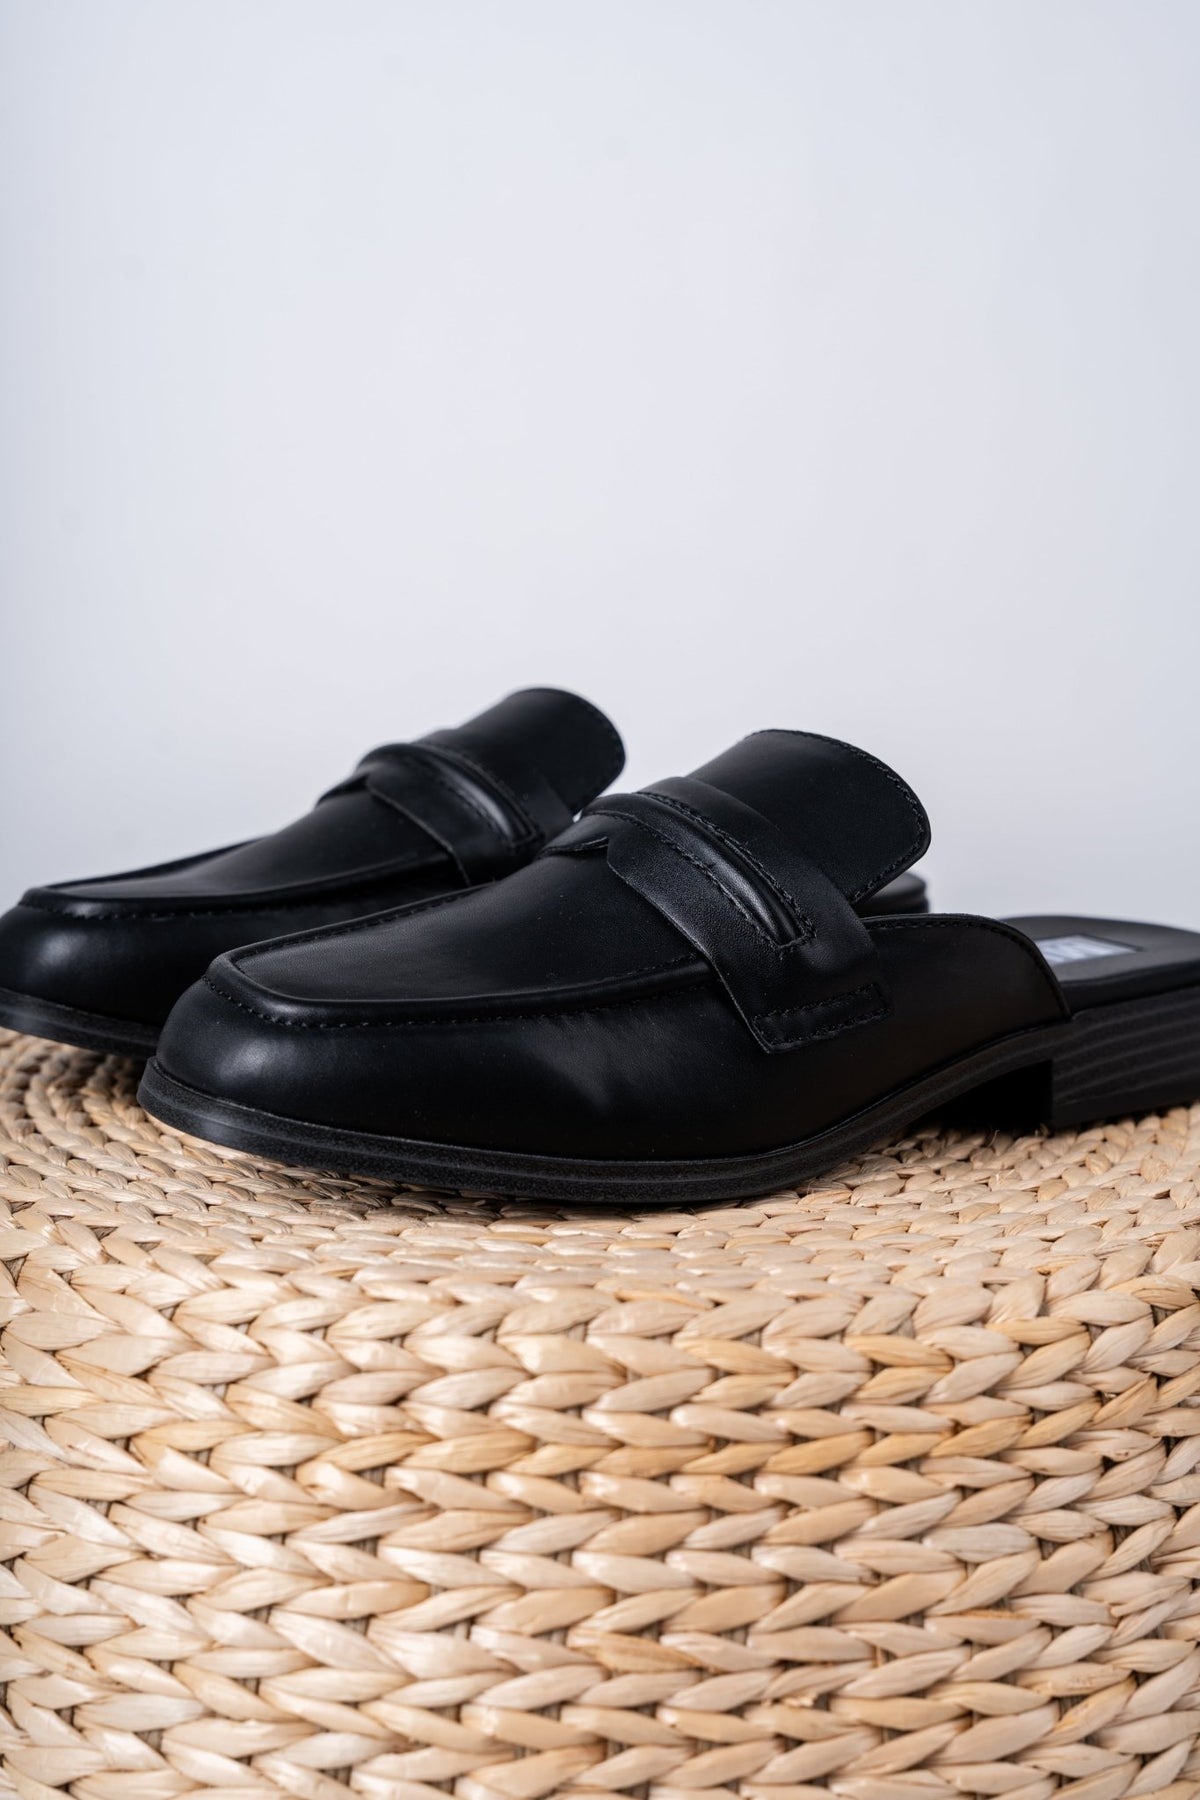 Milia mule loafer black - Cute Shoes - Trendy Shoes at Lush Fashion Lounge Boutique in Oklahoma City